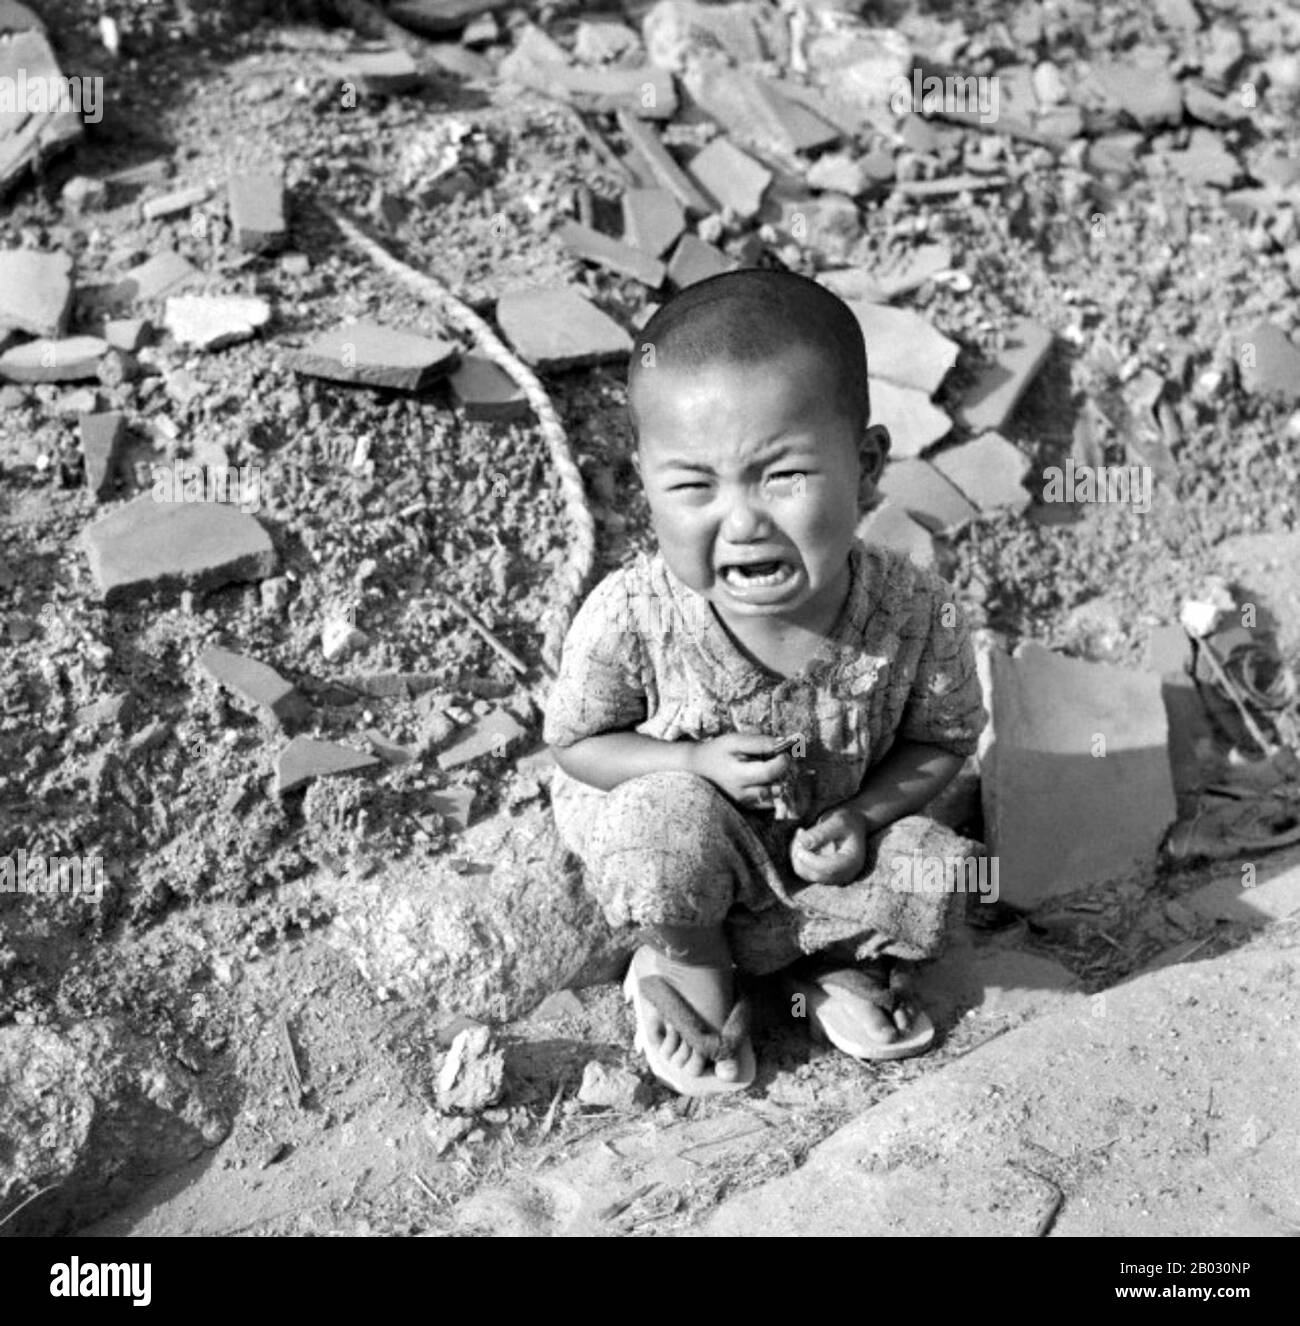 On Monday, August 6, 1945, at 8:15 am, the nuclear bomb 'Little Boy' was dropped on Hiroshima by an American B-29 bomber, the Enola Gay, directly killing an estimated 80,000 people.  By the end of the year, injury and radiation brought the total number of deaths to 90,000–166,000. The population before the bombing was around 340,000 to 350,000. Approximately 70% of the city's buildings were destroyed, and another 7% severely damaged. Stock Photo